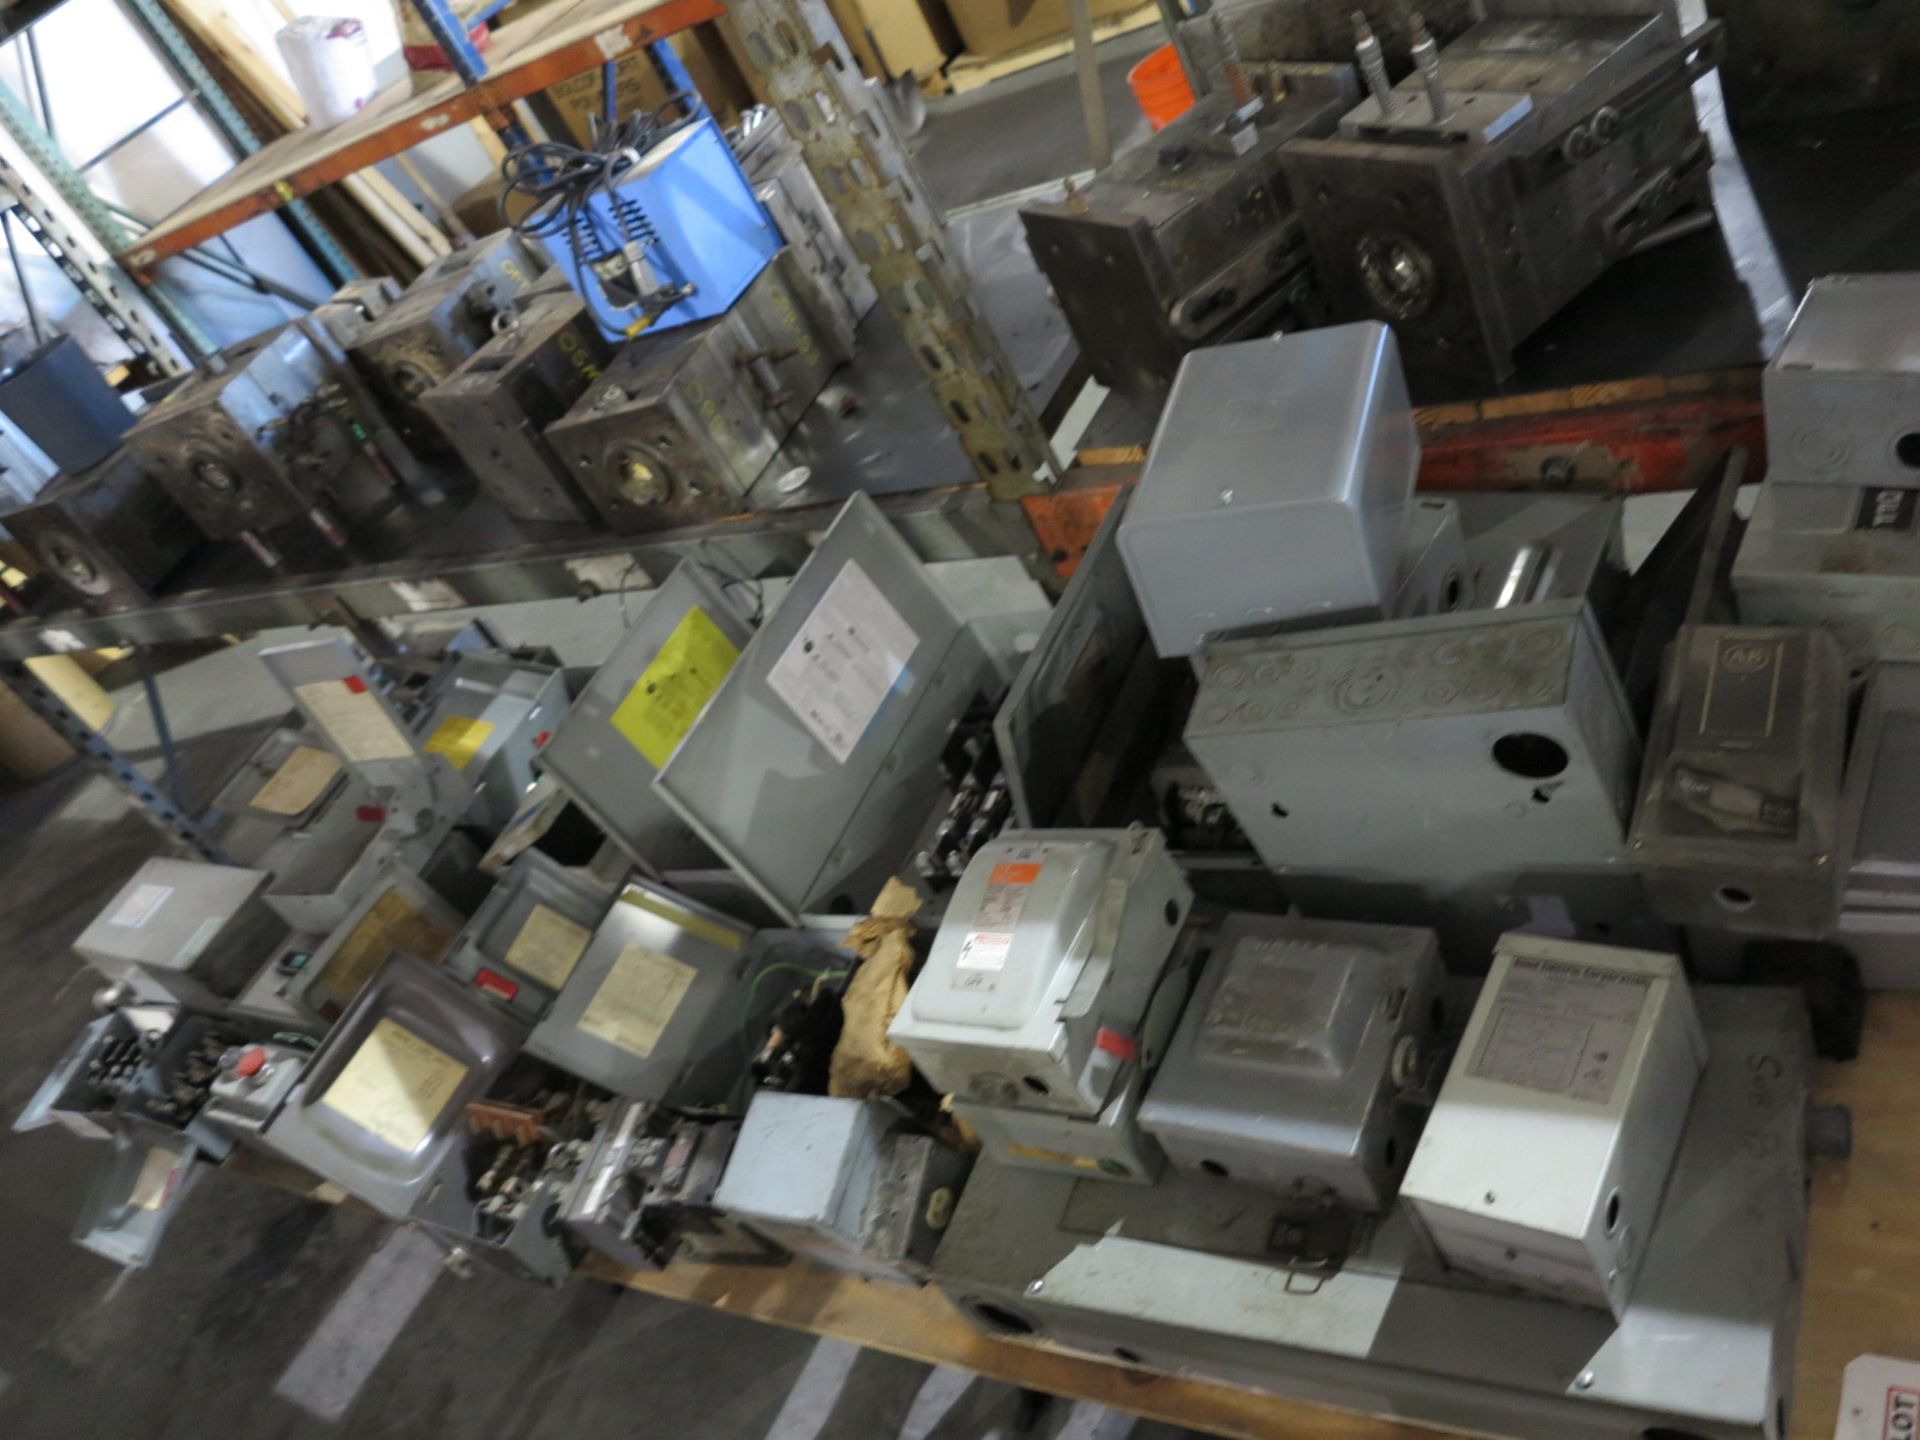 LOT - LARGE ASSORTMENT OF ELECTRICAL BOXES, FUSE BOXES, SAFETY SWITCHES, ETC.